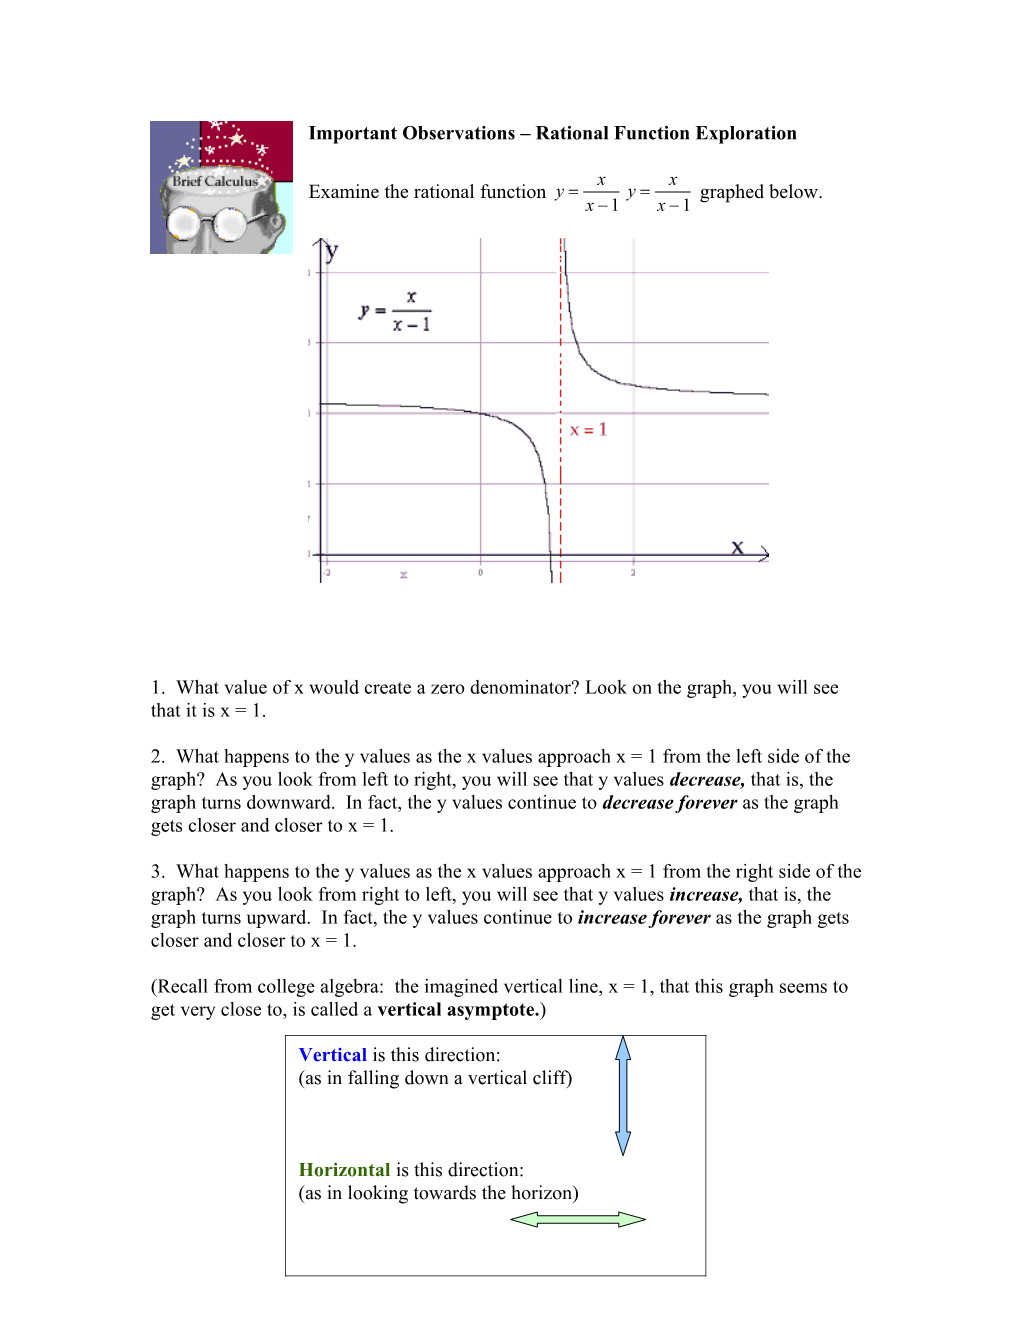 Important Observations Rational Function Exploration